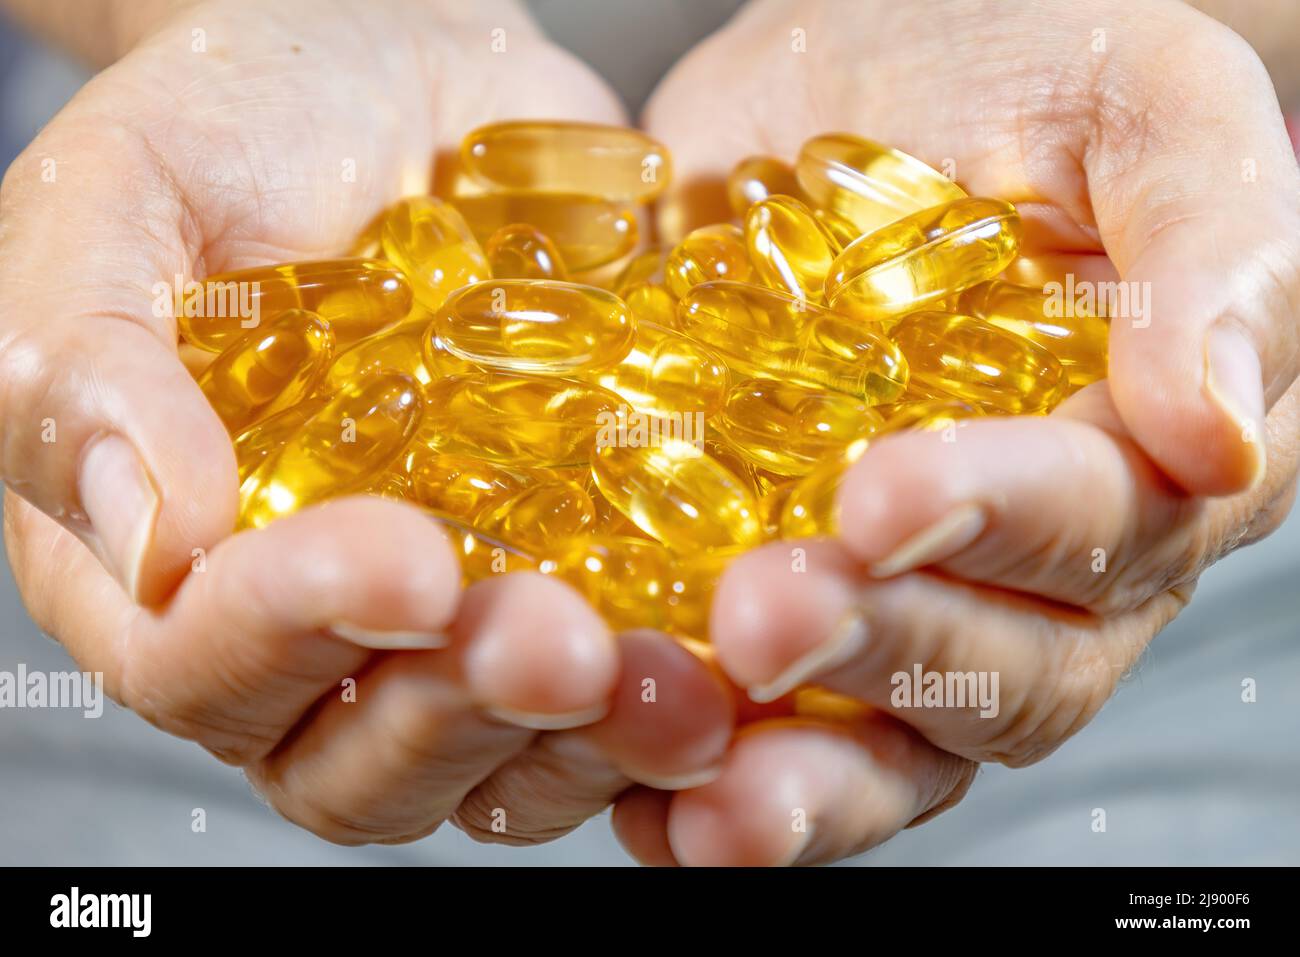 Woman's Hands holding Omega 3 capsules Stock Photo